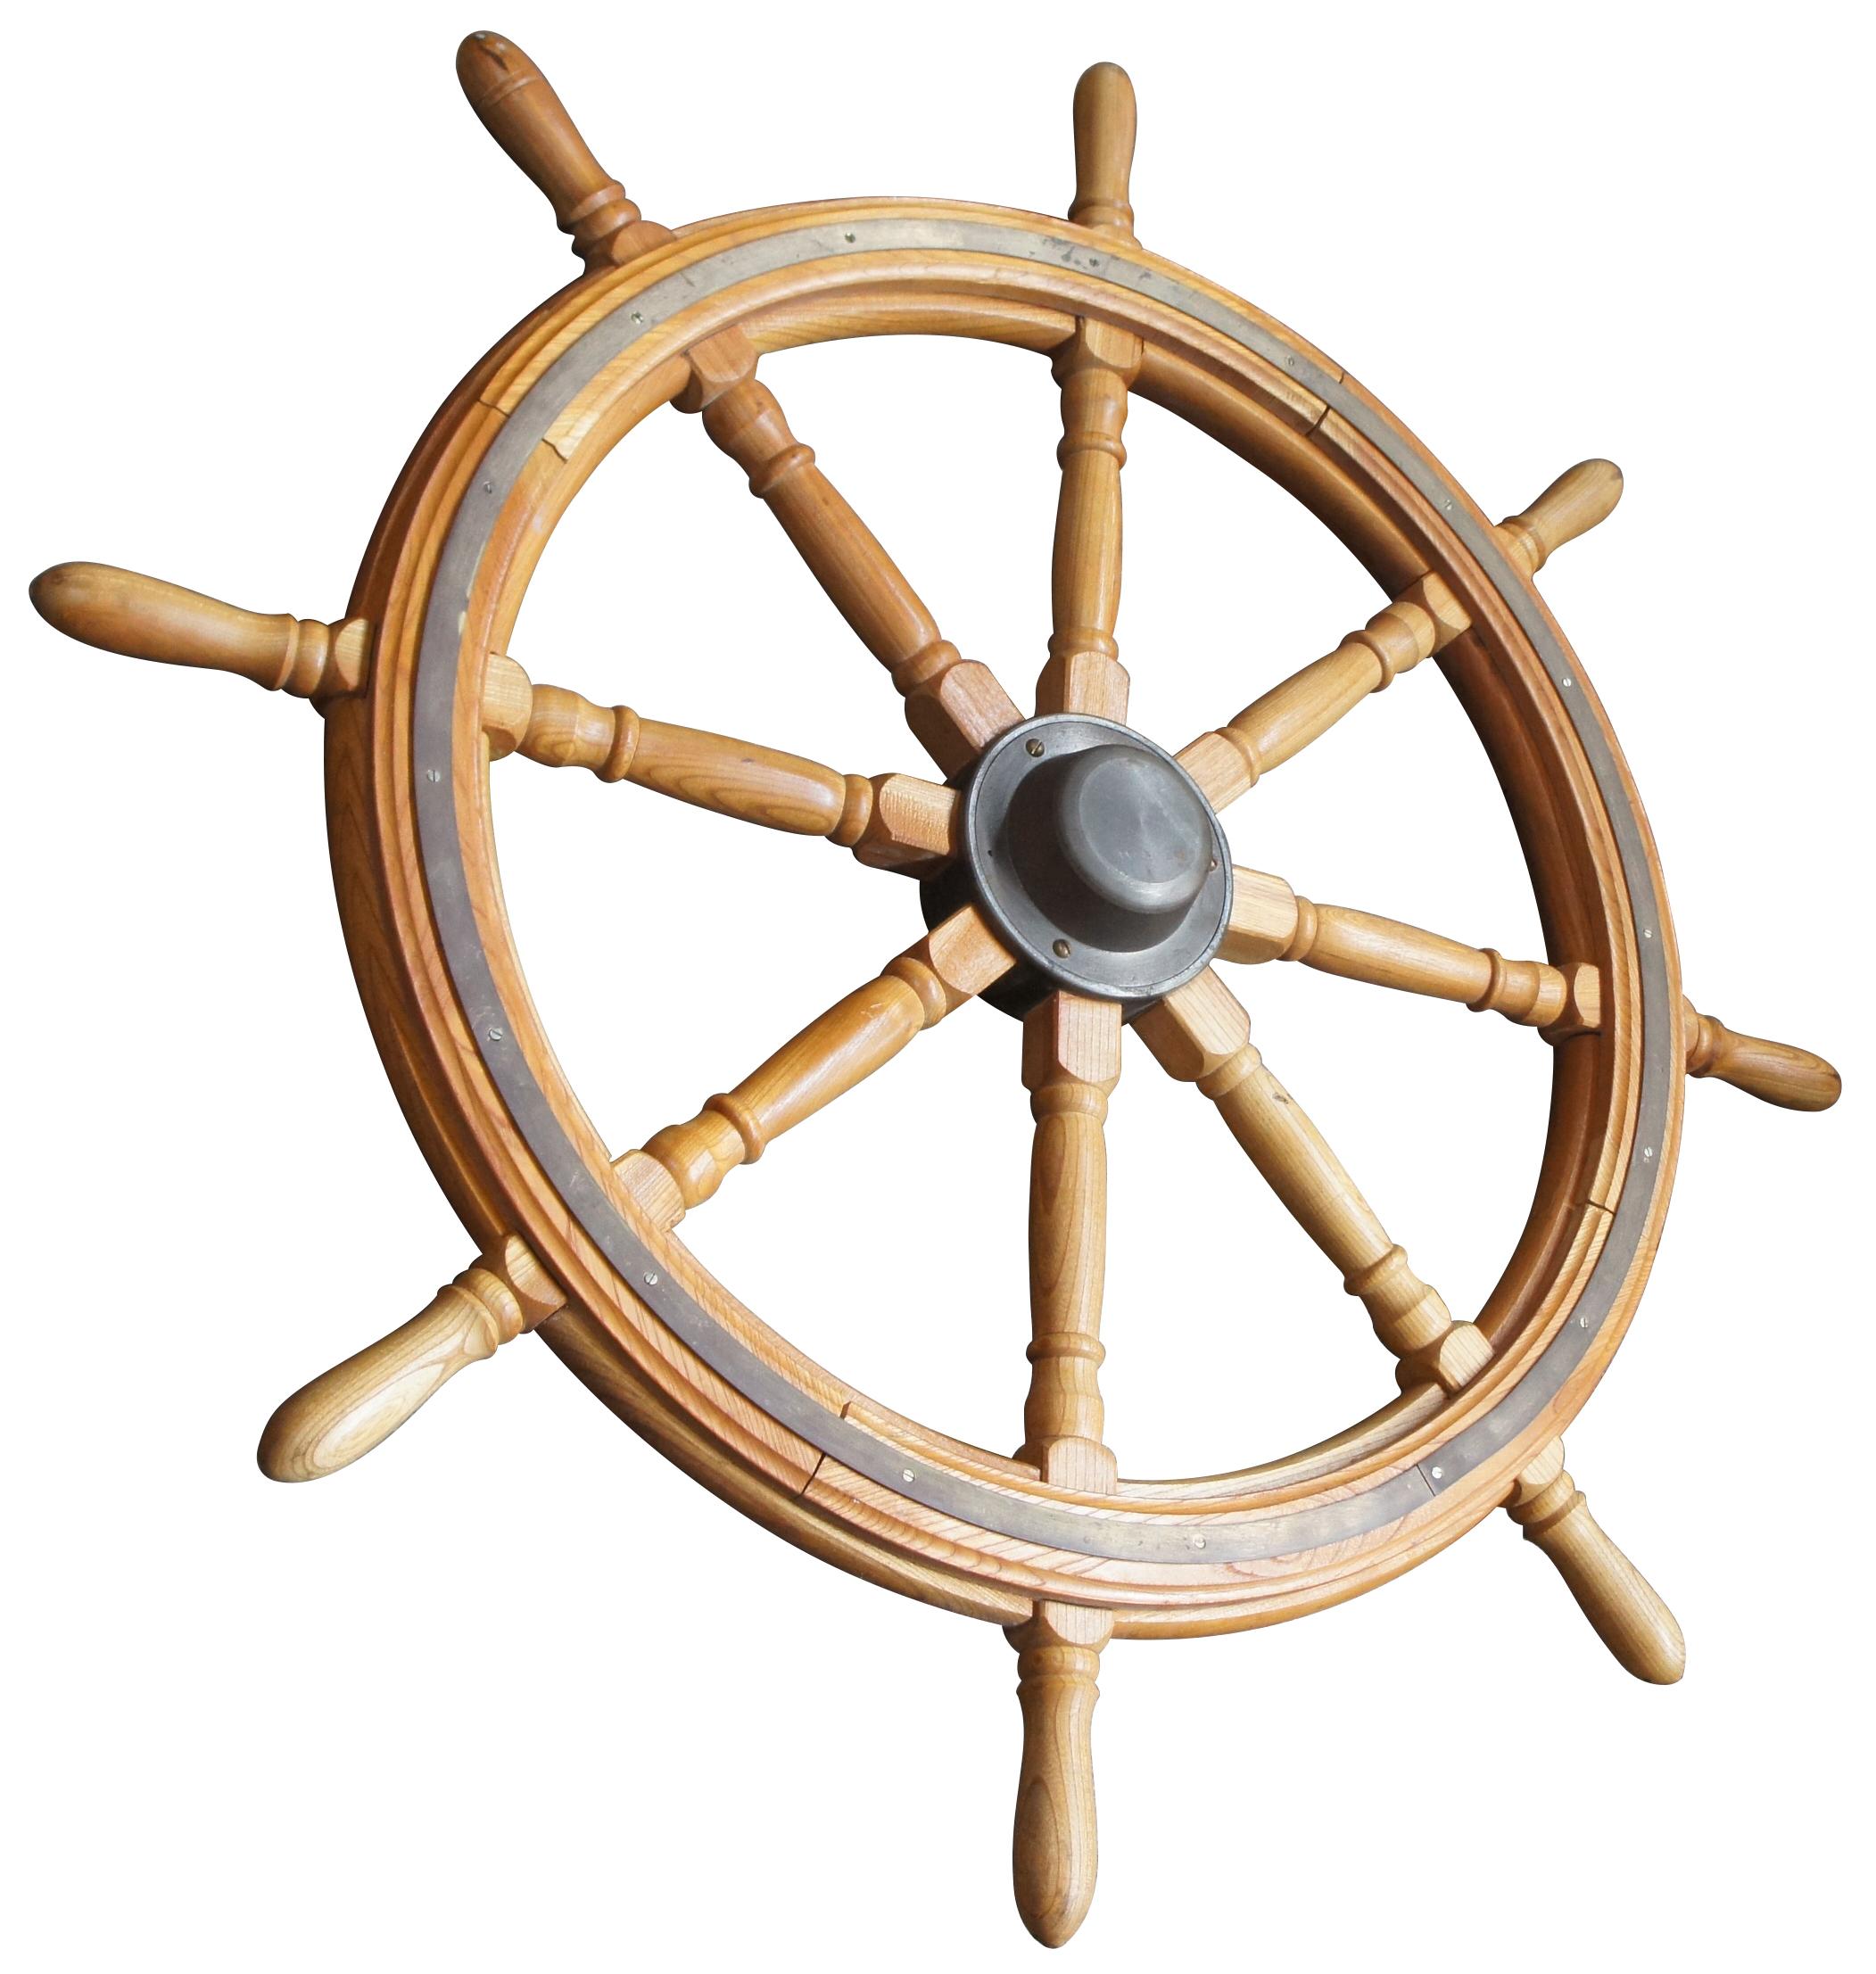 Antique oak and brass boat or ship wheel featuring rounded form with turned posts. Measure: 41